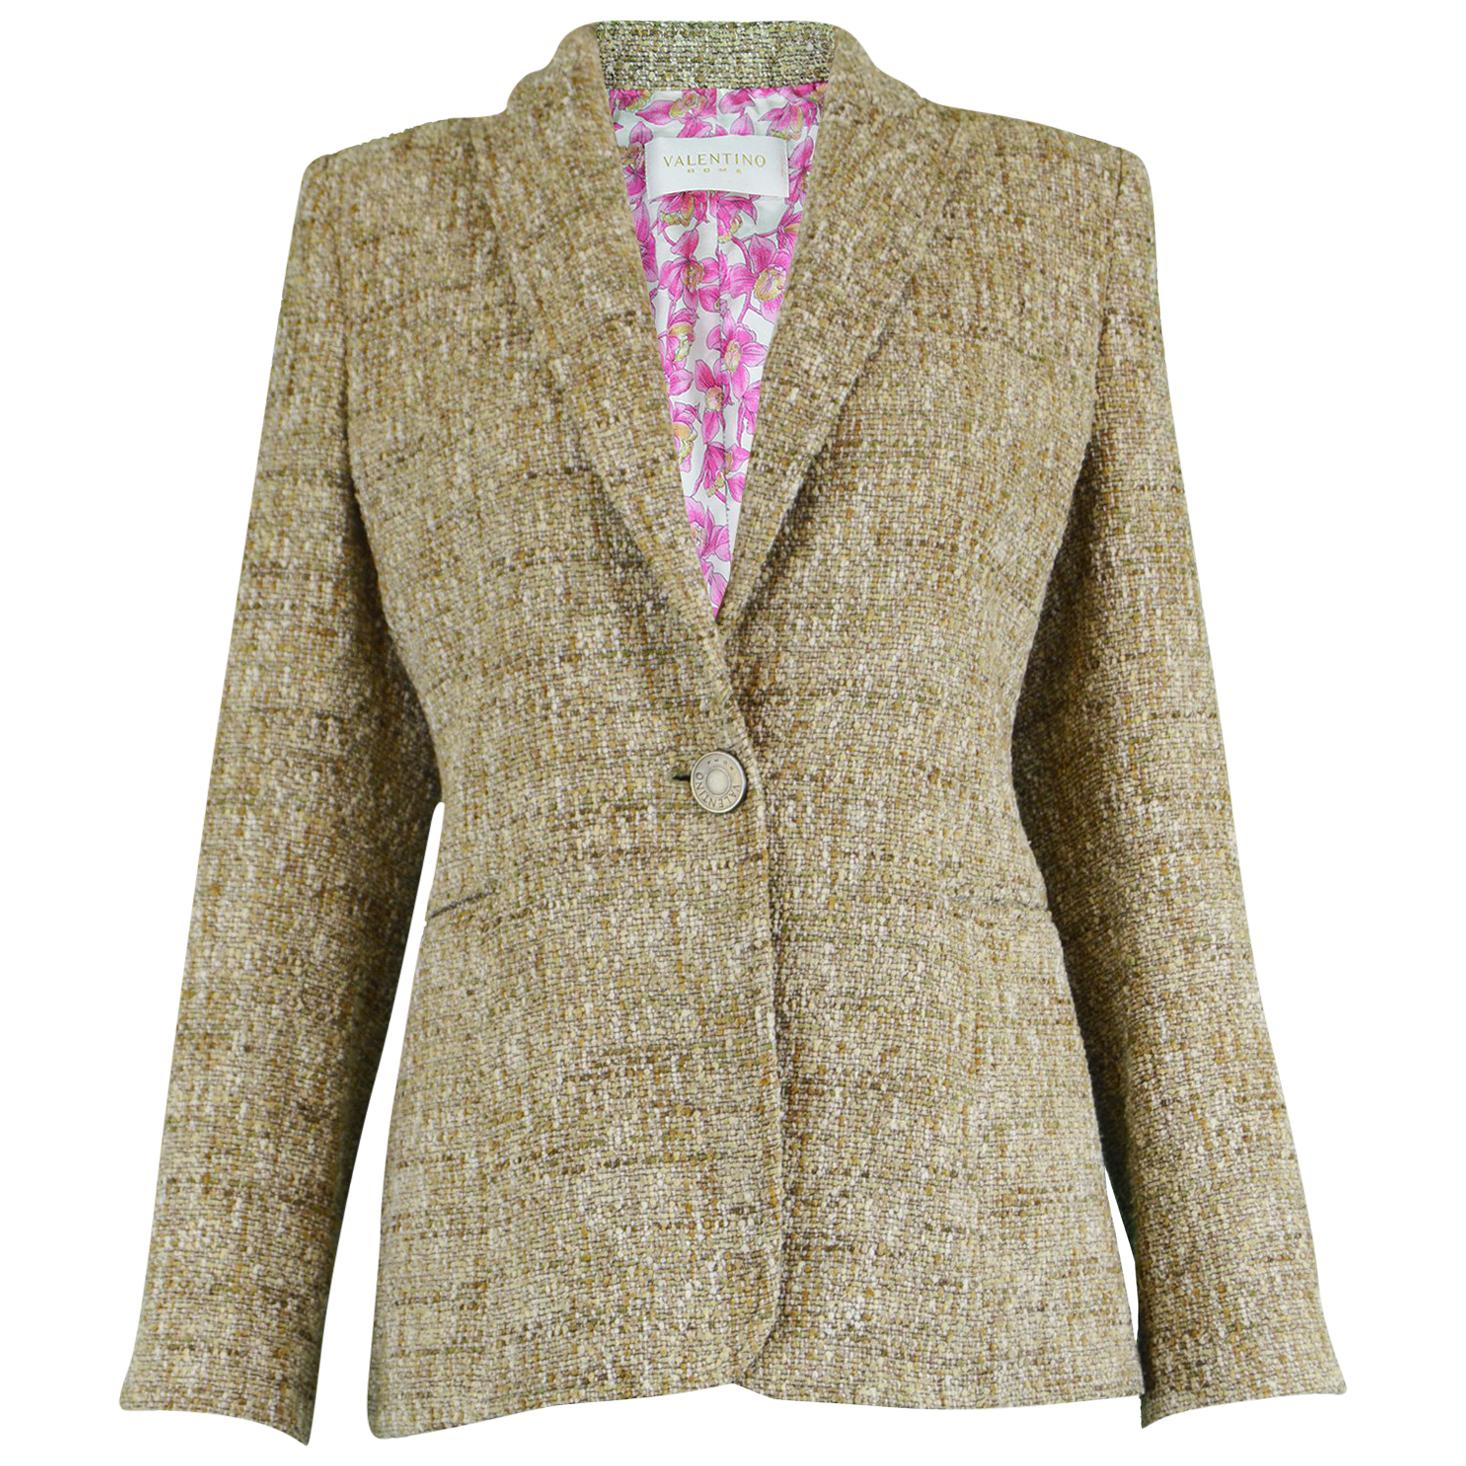 Valentino Roma Oatmeal Wool & Silk Bouclé Tweed Jacket with Floral Lining For Sale